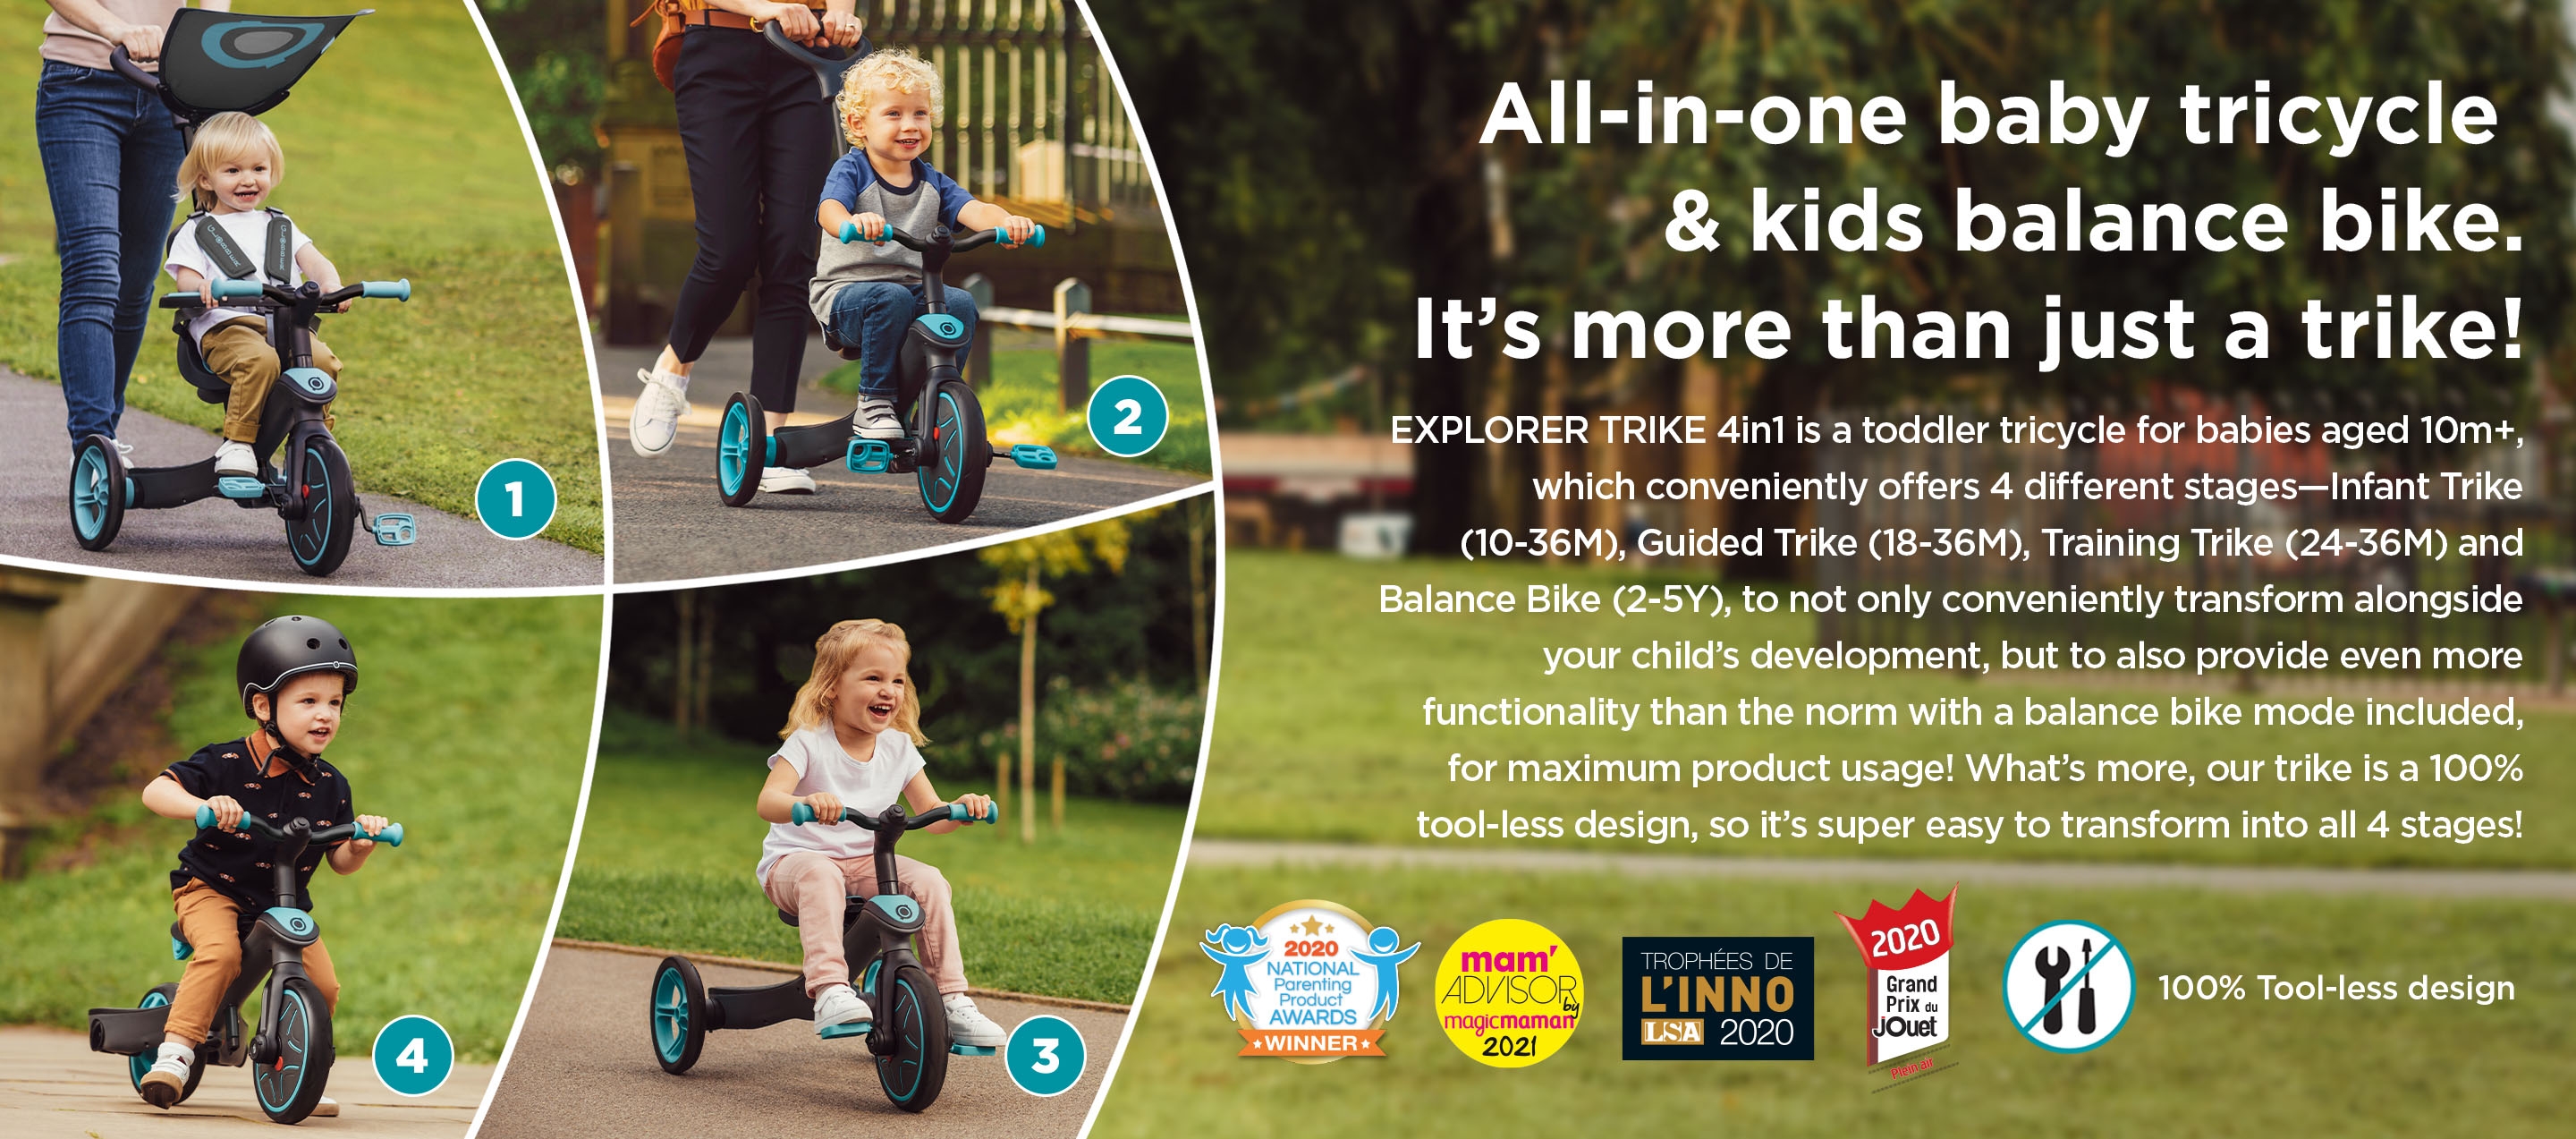 All-in-one baby tricycle & kids balance bike. It’s more than just a trike! EXPLORER TRIKE 4in1 is a toddler tricycle for babies aged 10m+, which conveniently offers 4 different stages—Infant Trike (10-36M), Guided Trike (18-36M), Training Trike (24-36M) and Balance Bike (2-5Y), to not only conveniently transform alongside your child’s development, but to also provide even more functionality than the norm with a balance bike mode included, for maximum product usage! What’s more, our trike is a 100% tool-less design, so it’s super easy to transform into all 4 stages!  